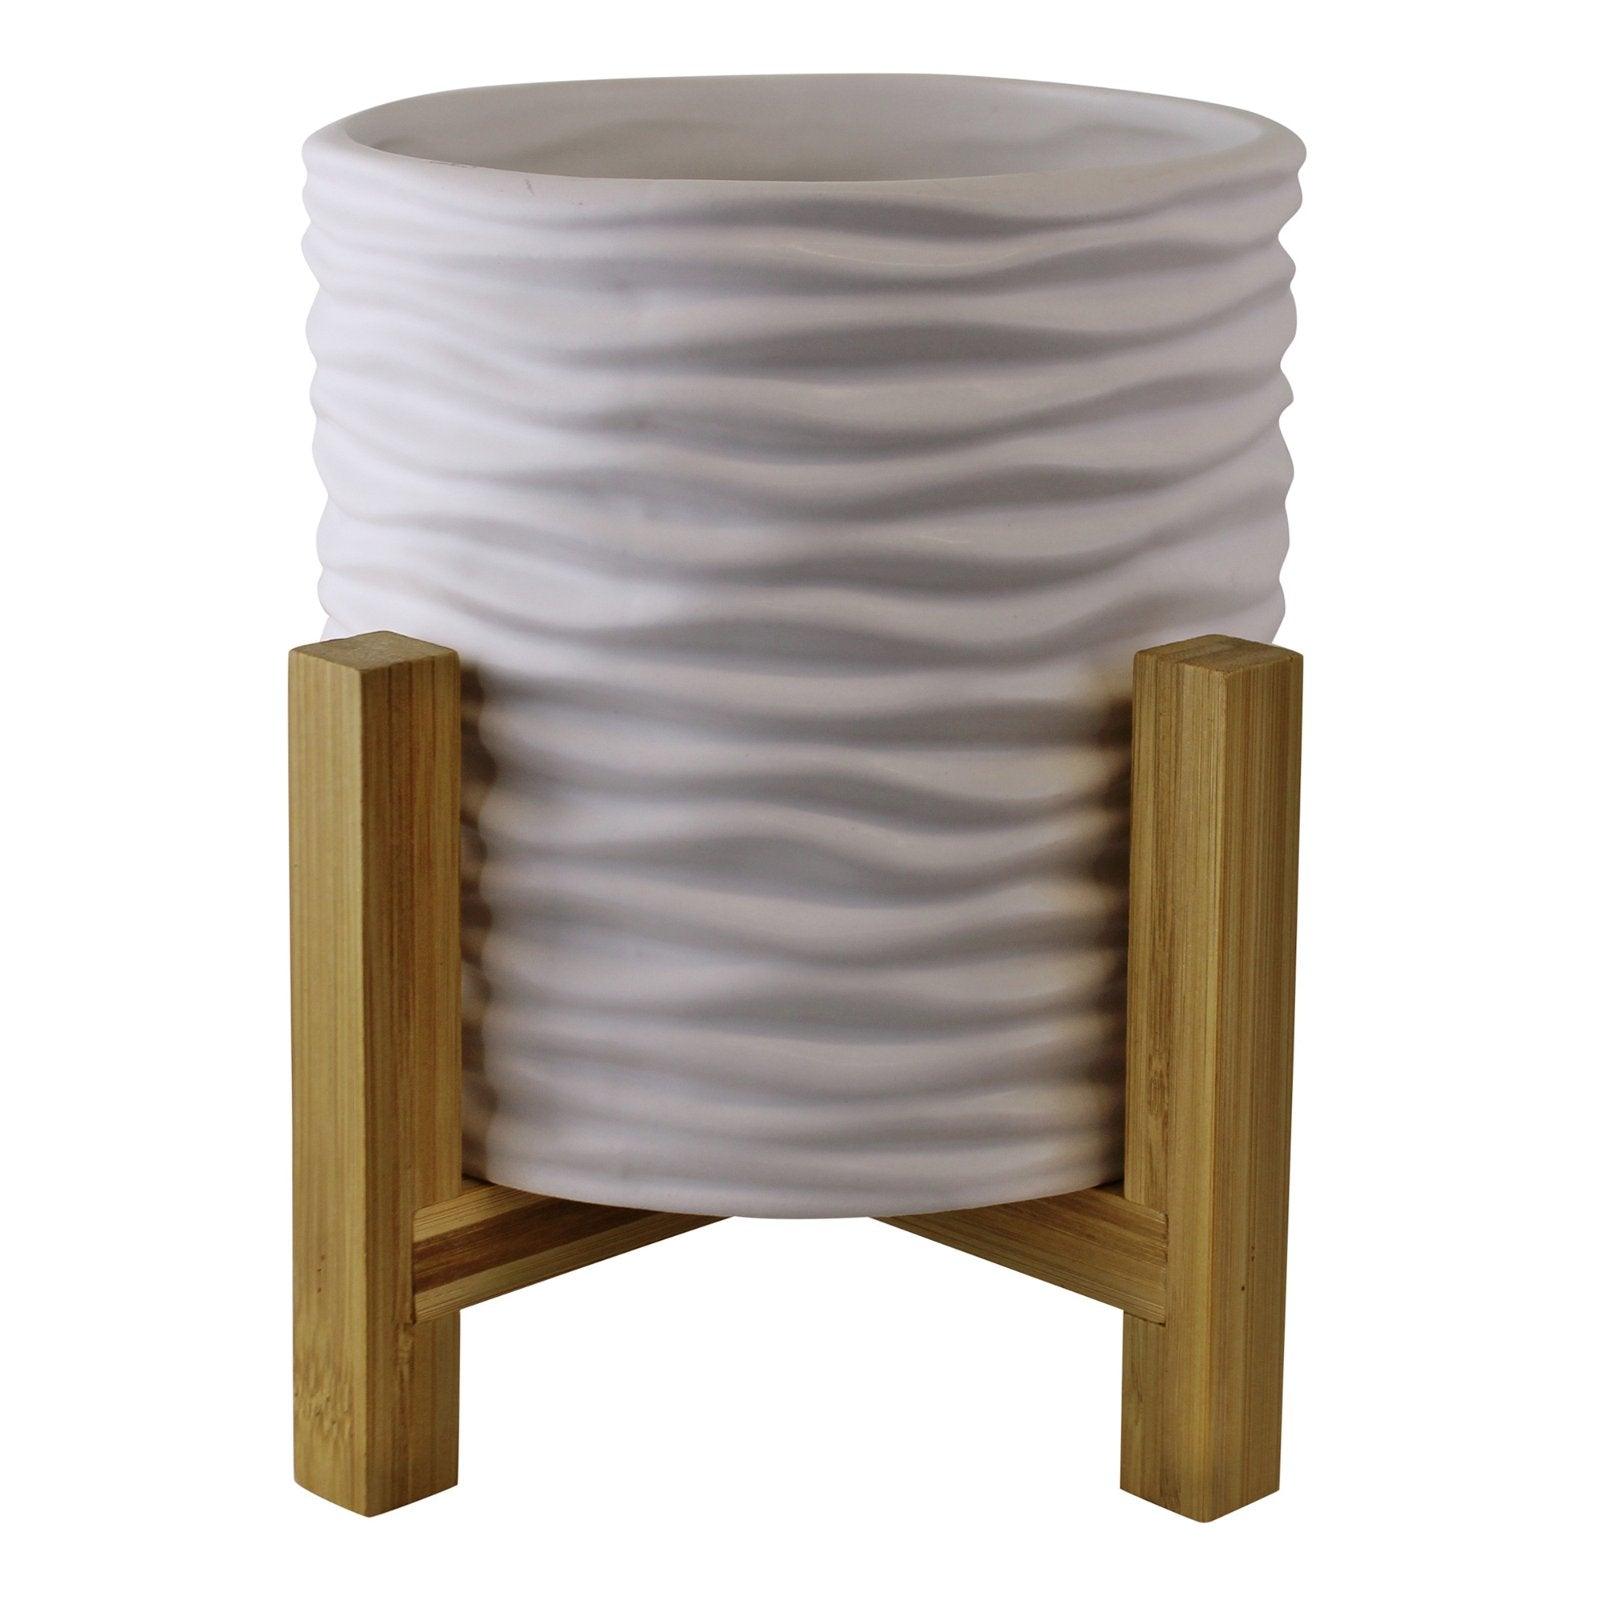 View Small White Stoneware Planter On Wooden Stand information